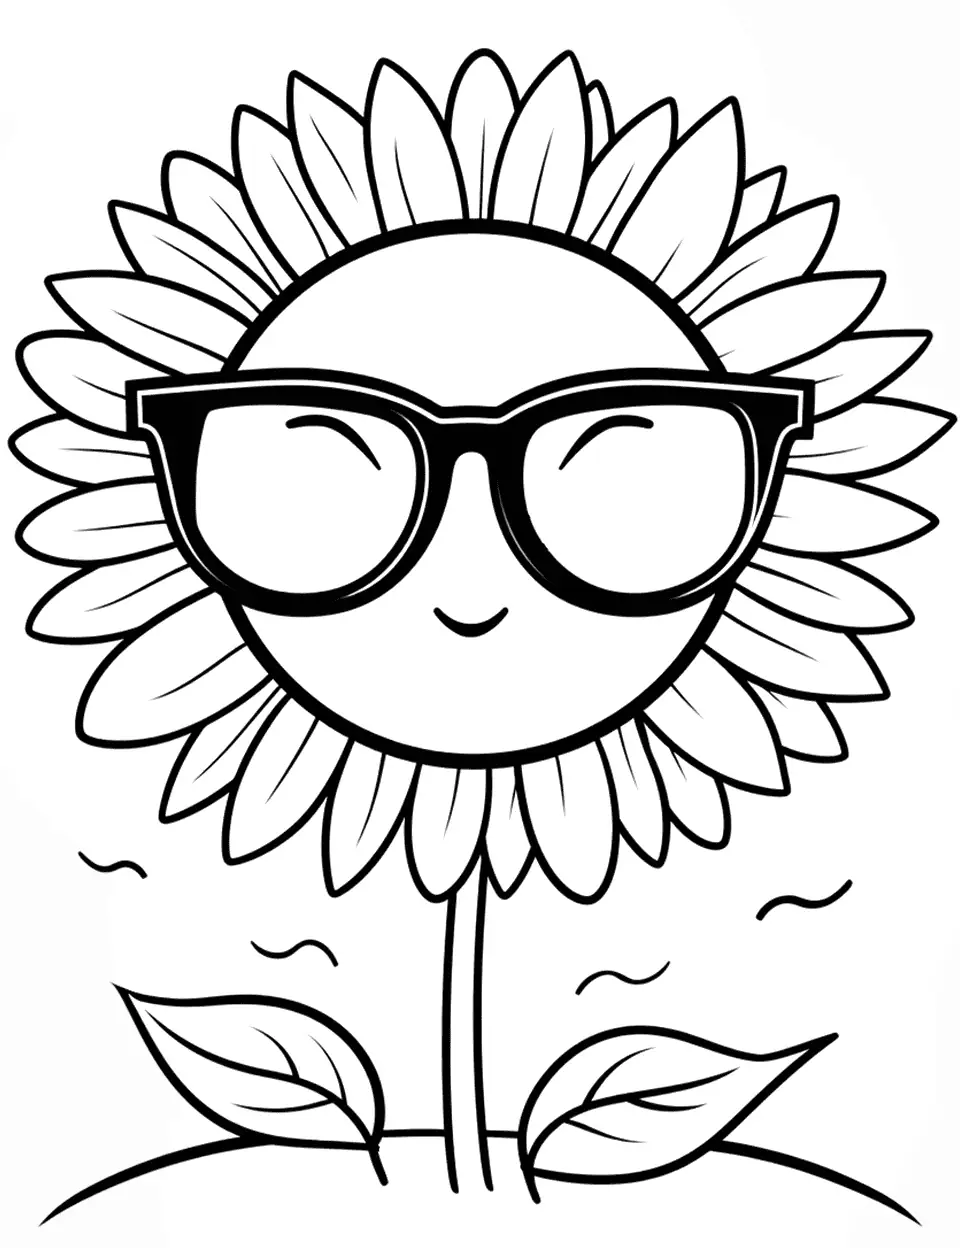 Sunflower with Sunglasses Coloring Page - A sunflower wearing a pair of cool sunglasses.